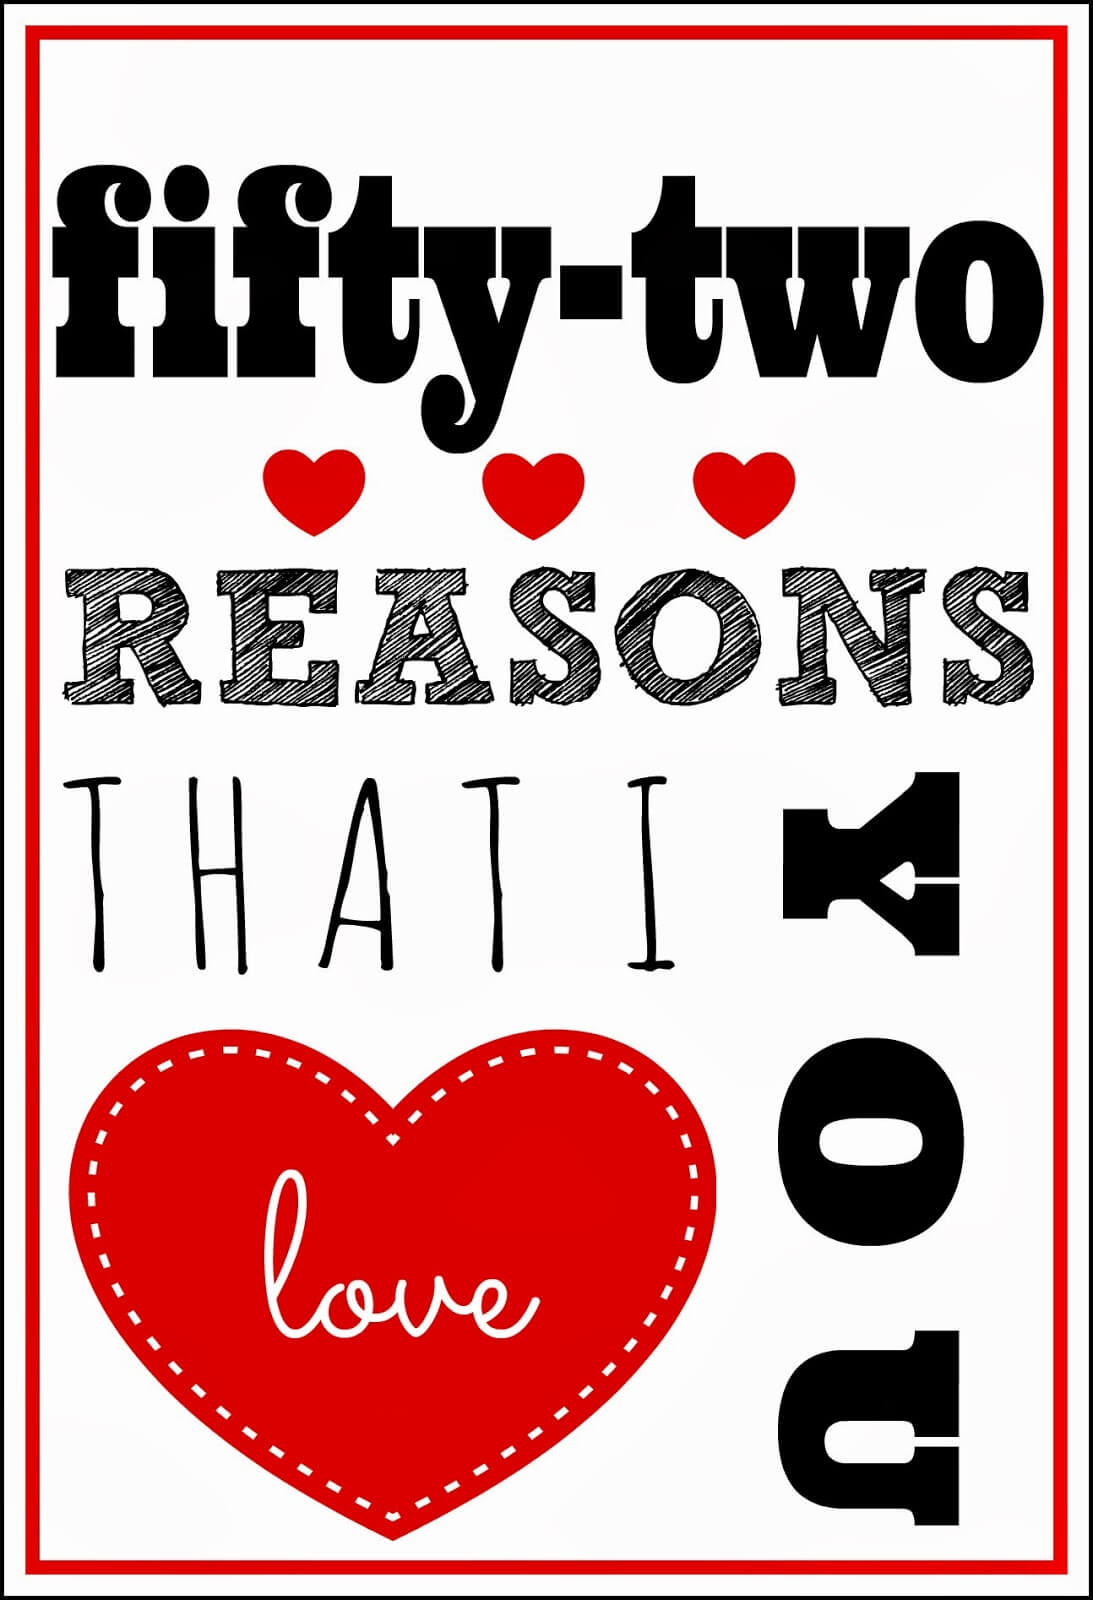 52 Reasons I Love You Template Free ] – 1000 Ideas About 52 Throughout 52 Reasons Why I Love You Cards Templates